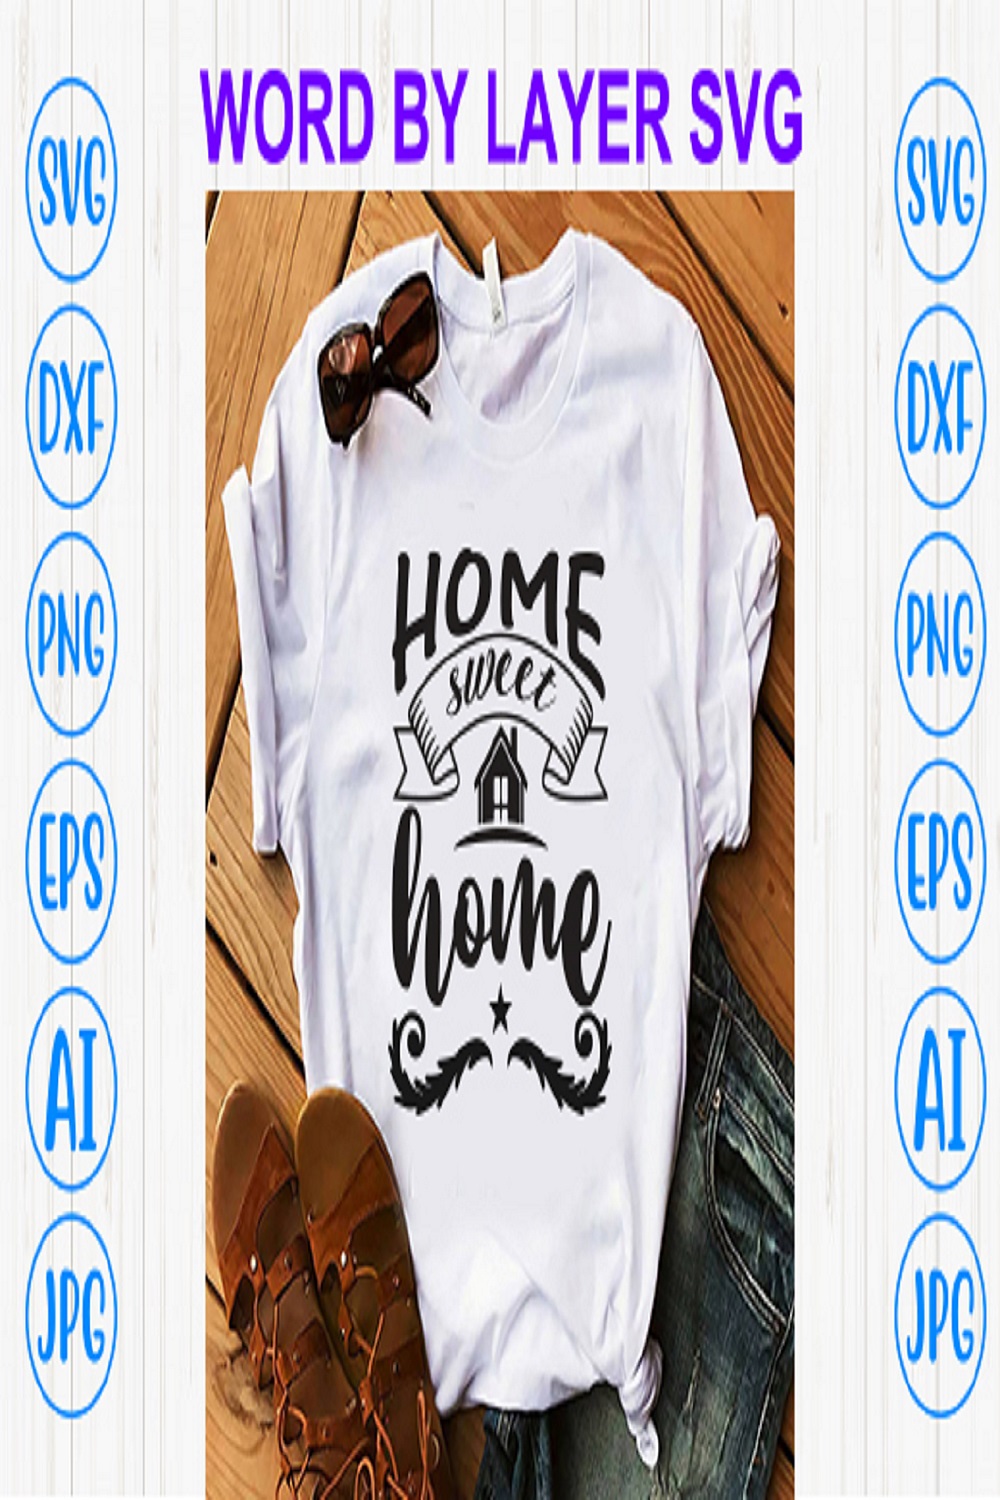 Home sweet home pinterest preview image.